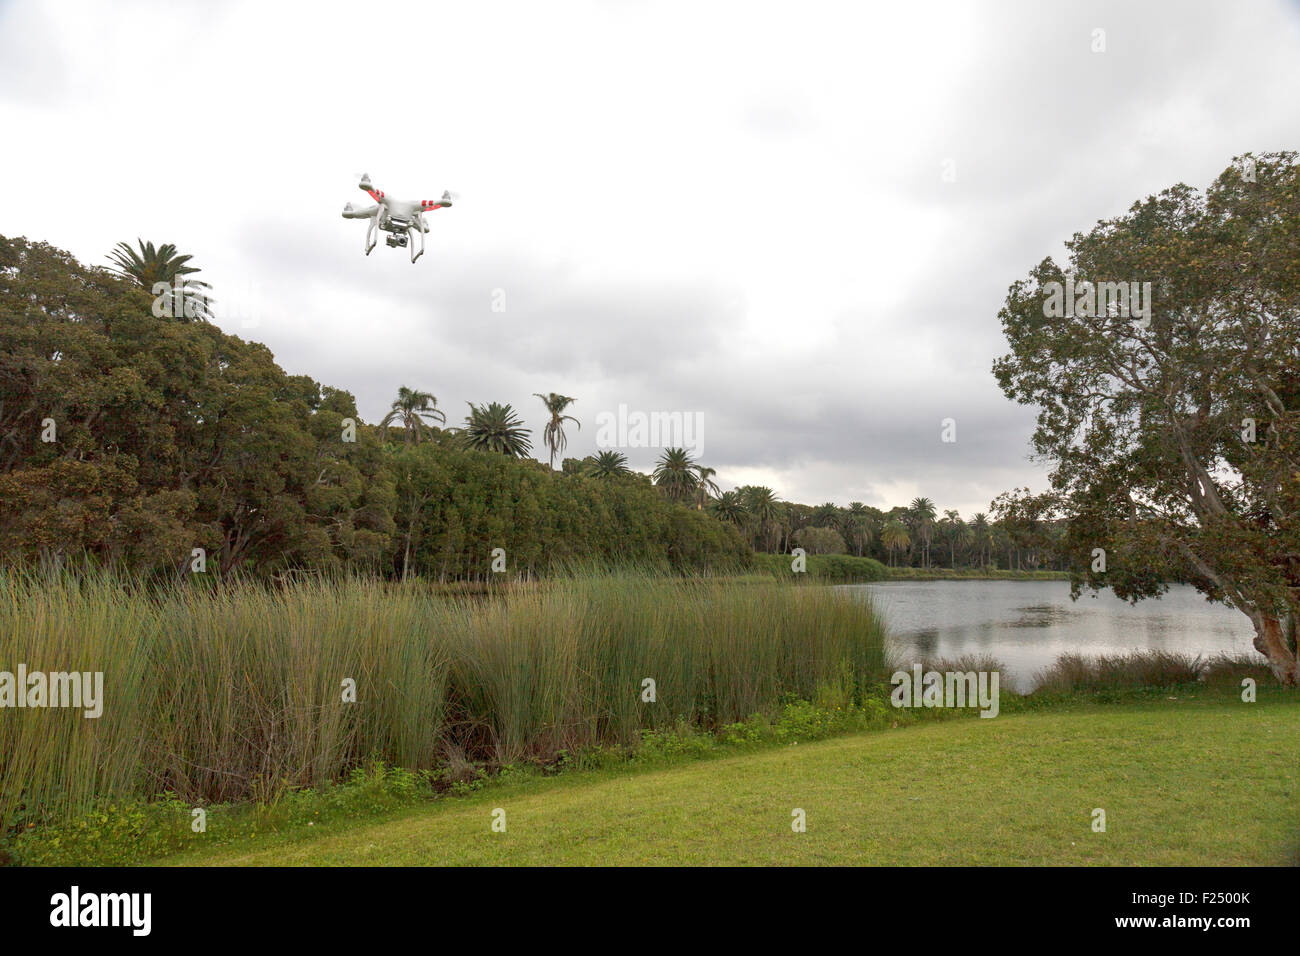 A flying drone with a gimbal and camera attached. Stock Photo